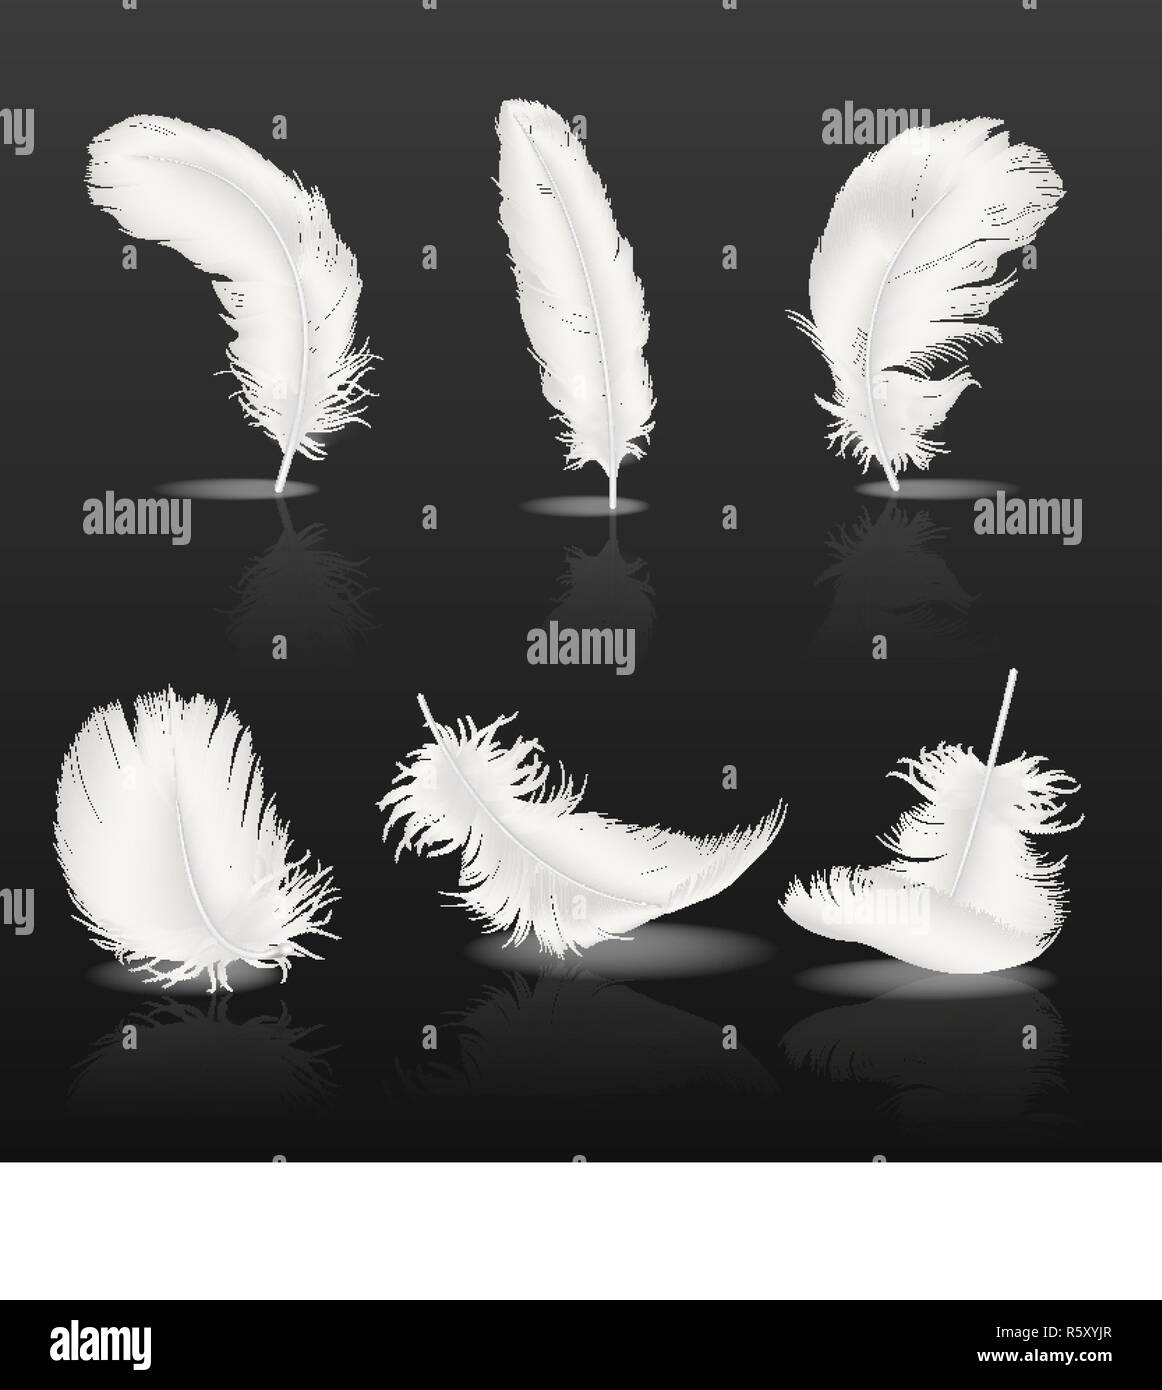 1,874,802 White Feathers Background Images, Stock Photos, 3D objects, &  Vectors